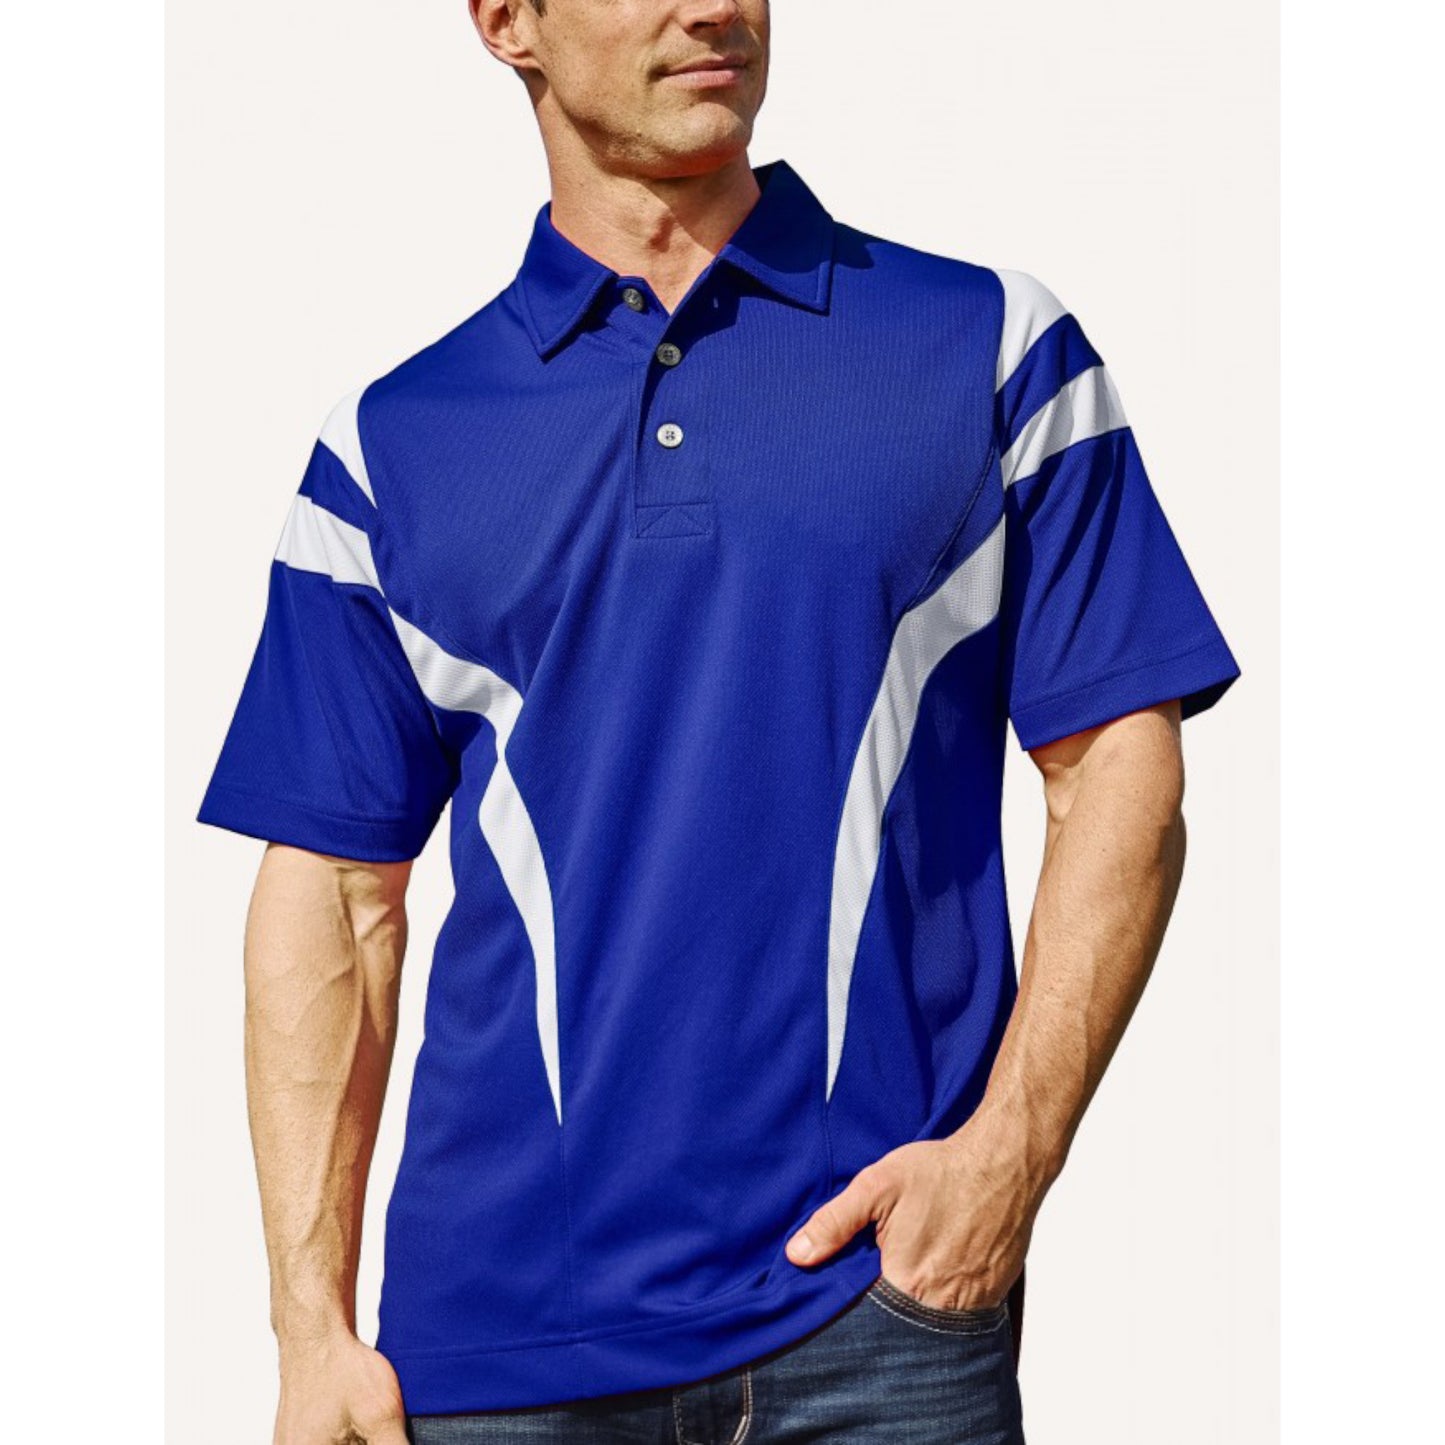 Pro Celebrity Men's Flame Thrower Polo Shirt